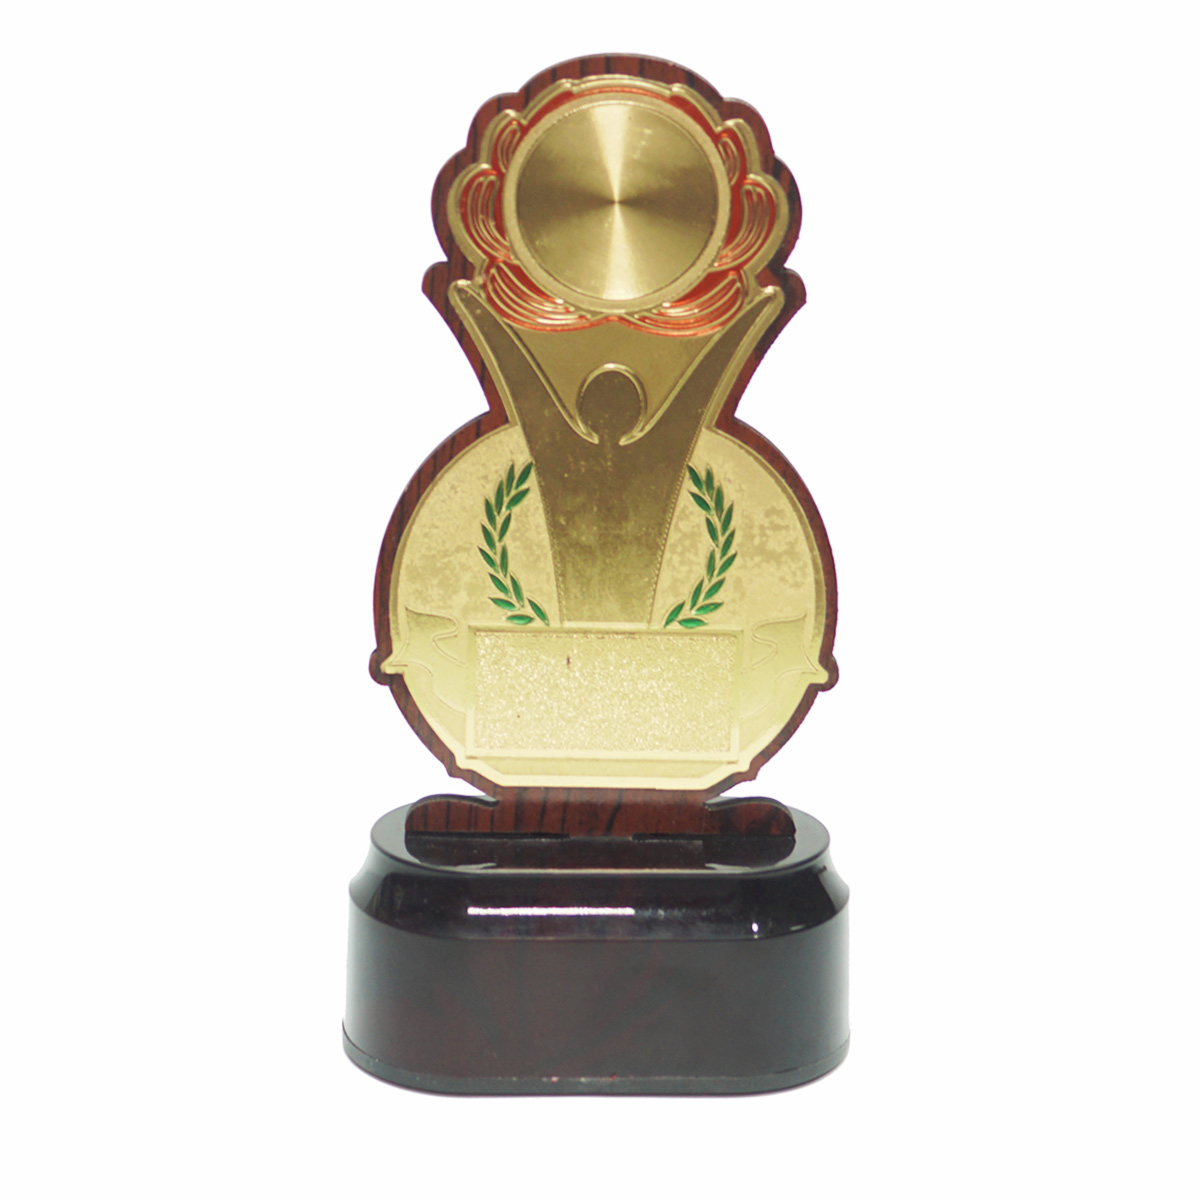 penhouse.in TP4502 Wooden Trophy 7 Inch With Customization SKU TP008